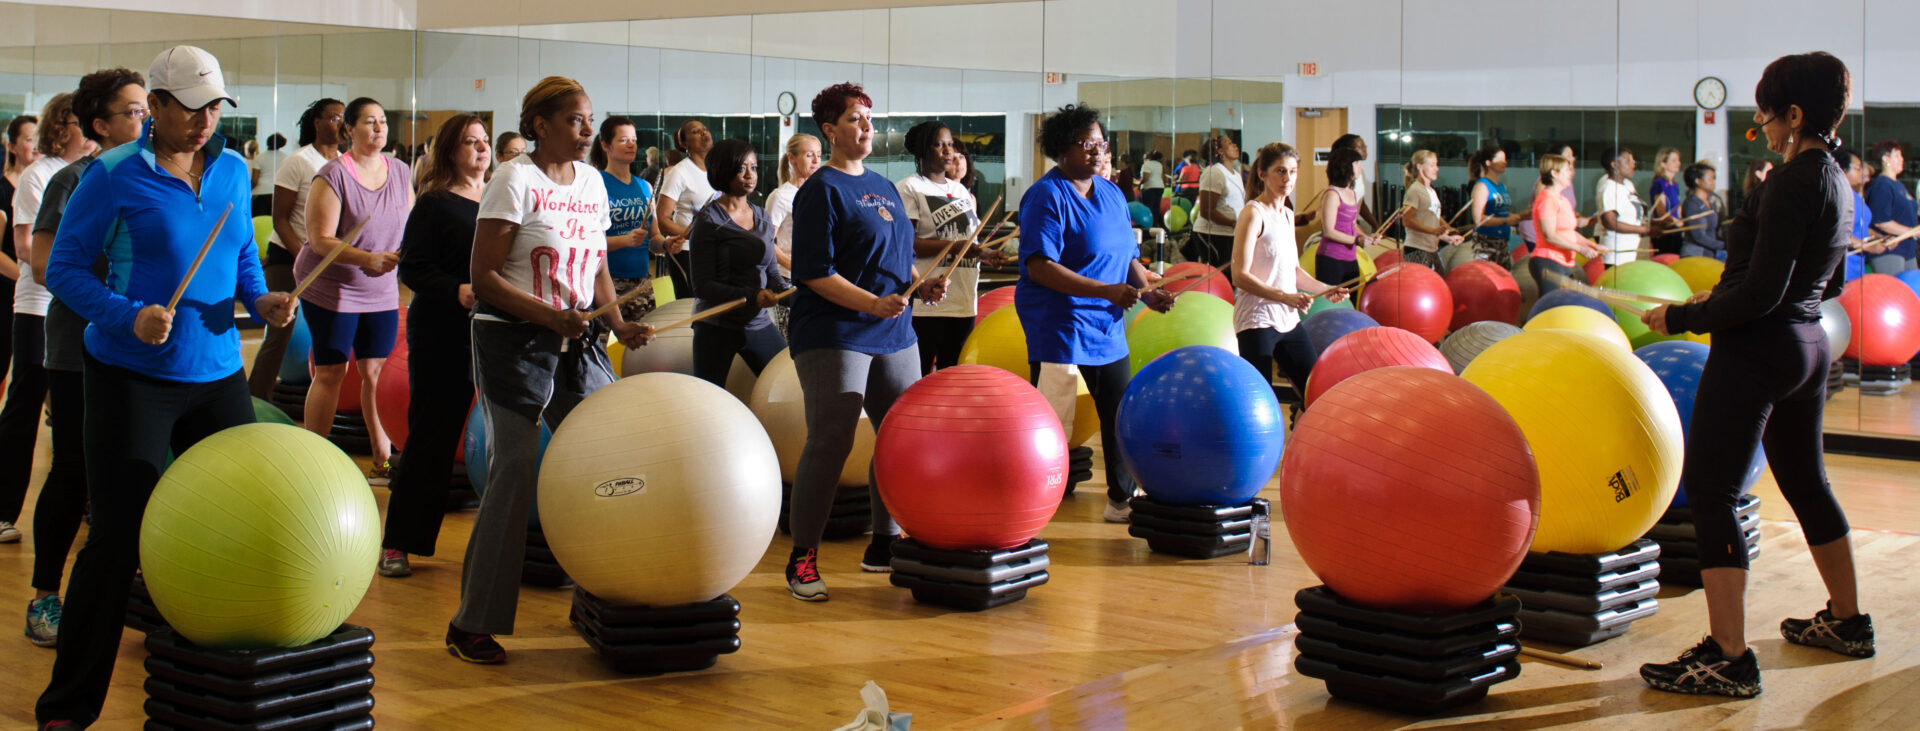 A group of people standing around some exercise balls